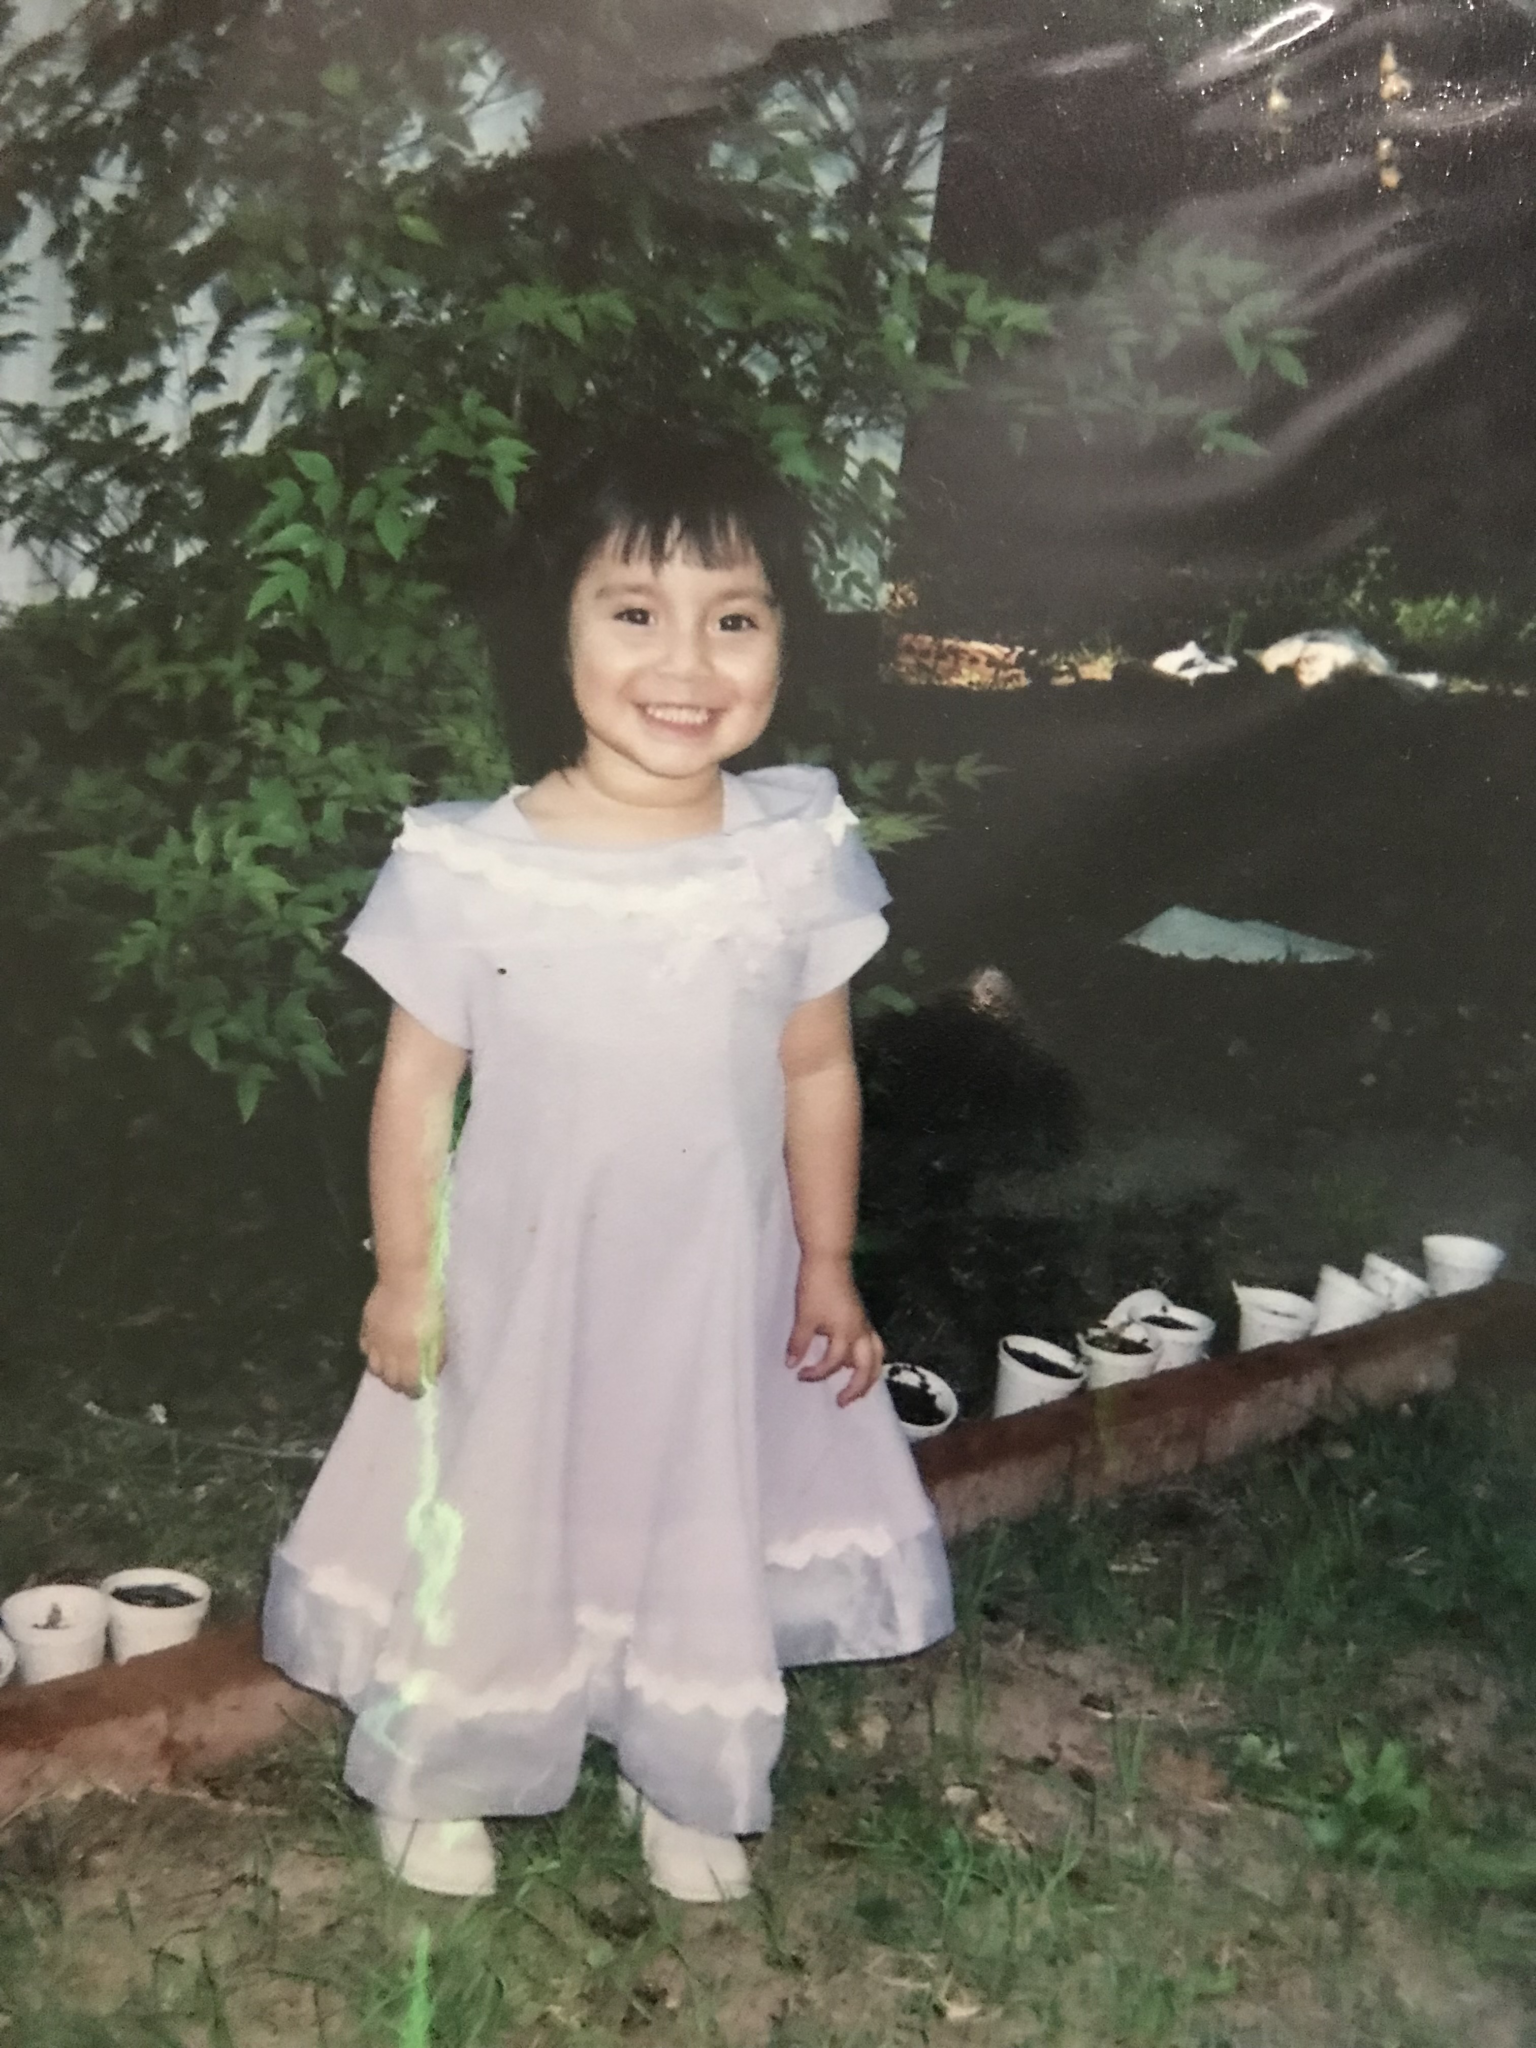 Pre-school age Stephanie stands in front of a garden with a short dark bob and a beautiful white frilly dress.